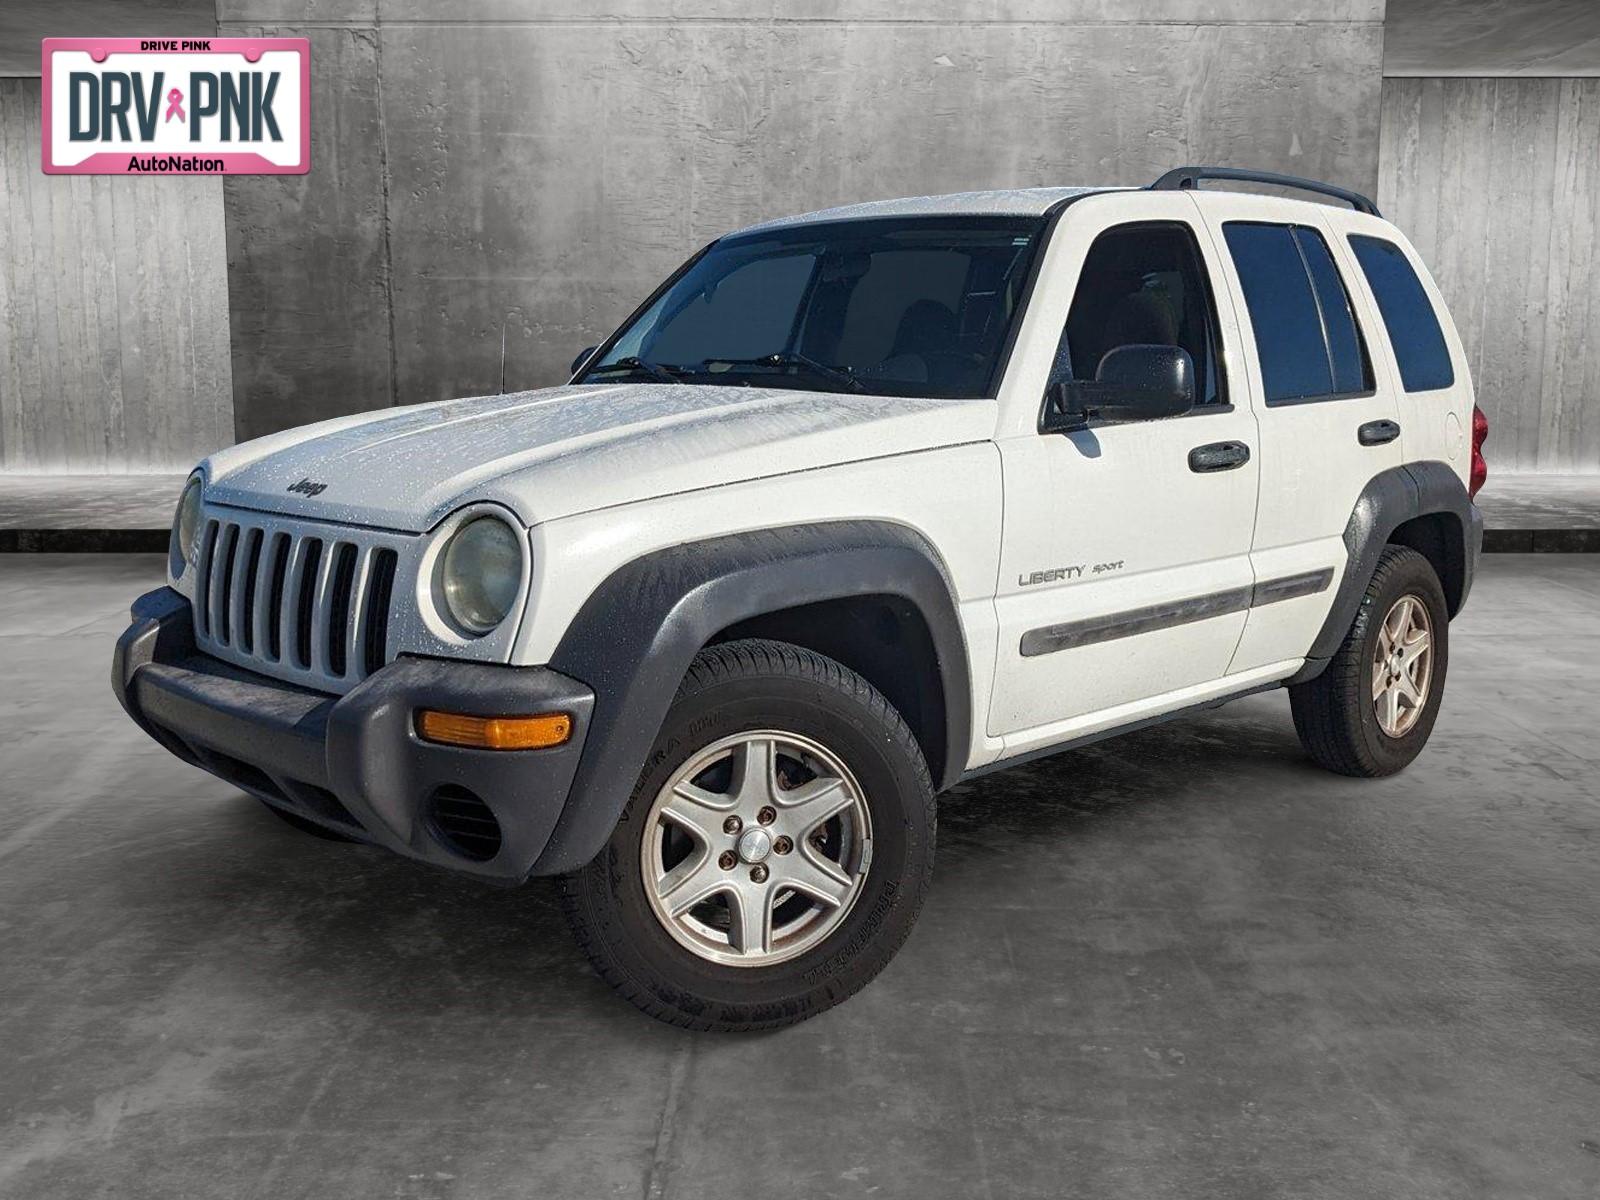 2003 Jeep Liberty Vehicle Photo in Winter Park, FL 32792